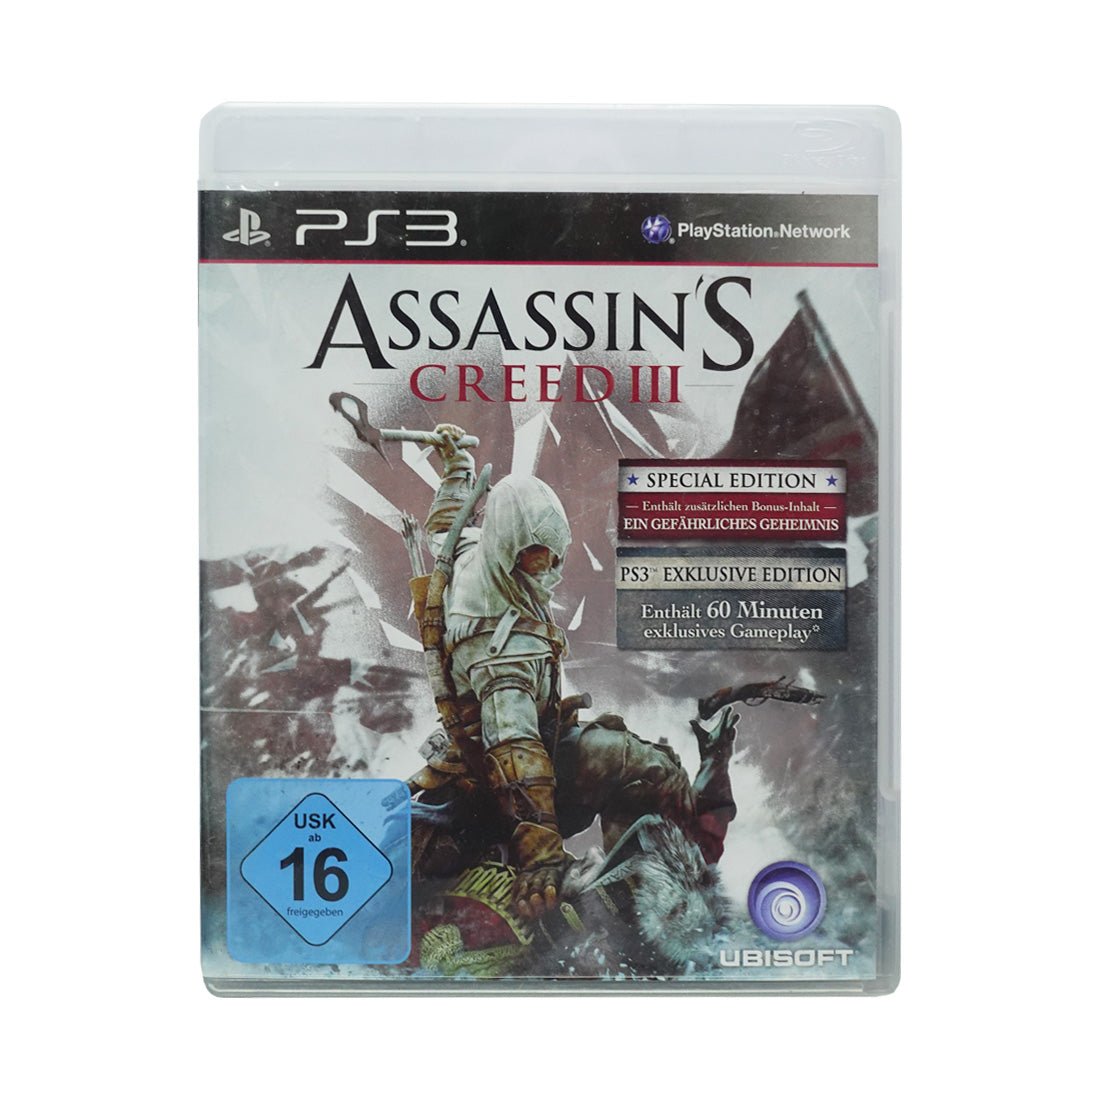 (Pre-Owned) Assassin's Creed III - PlayStation 3 - ريترو - Store 974 | ستور ٩٧٤